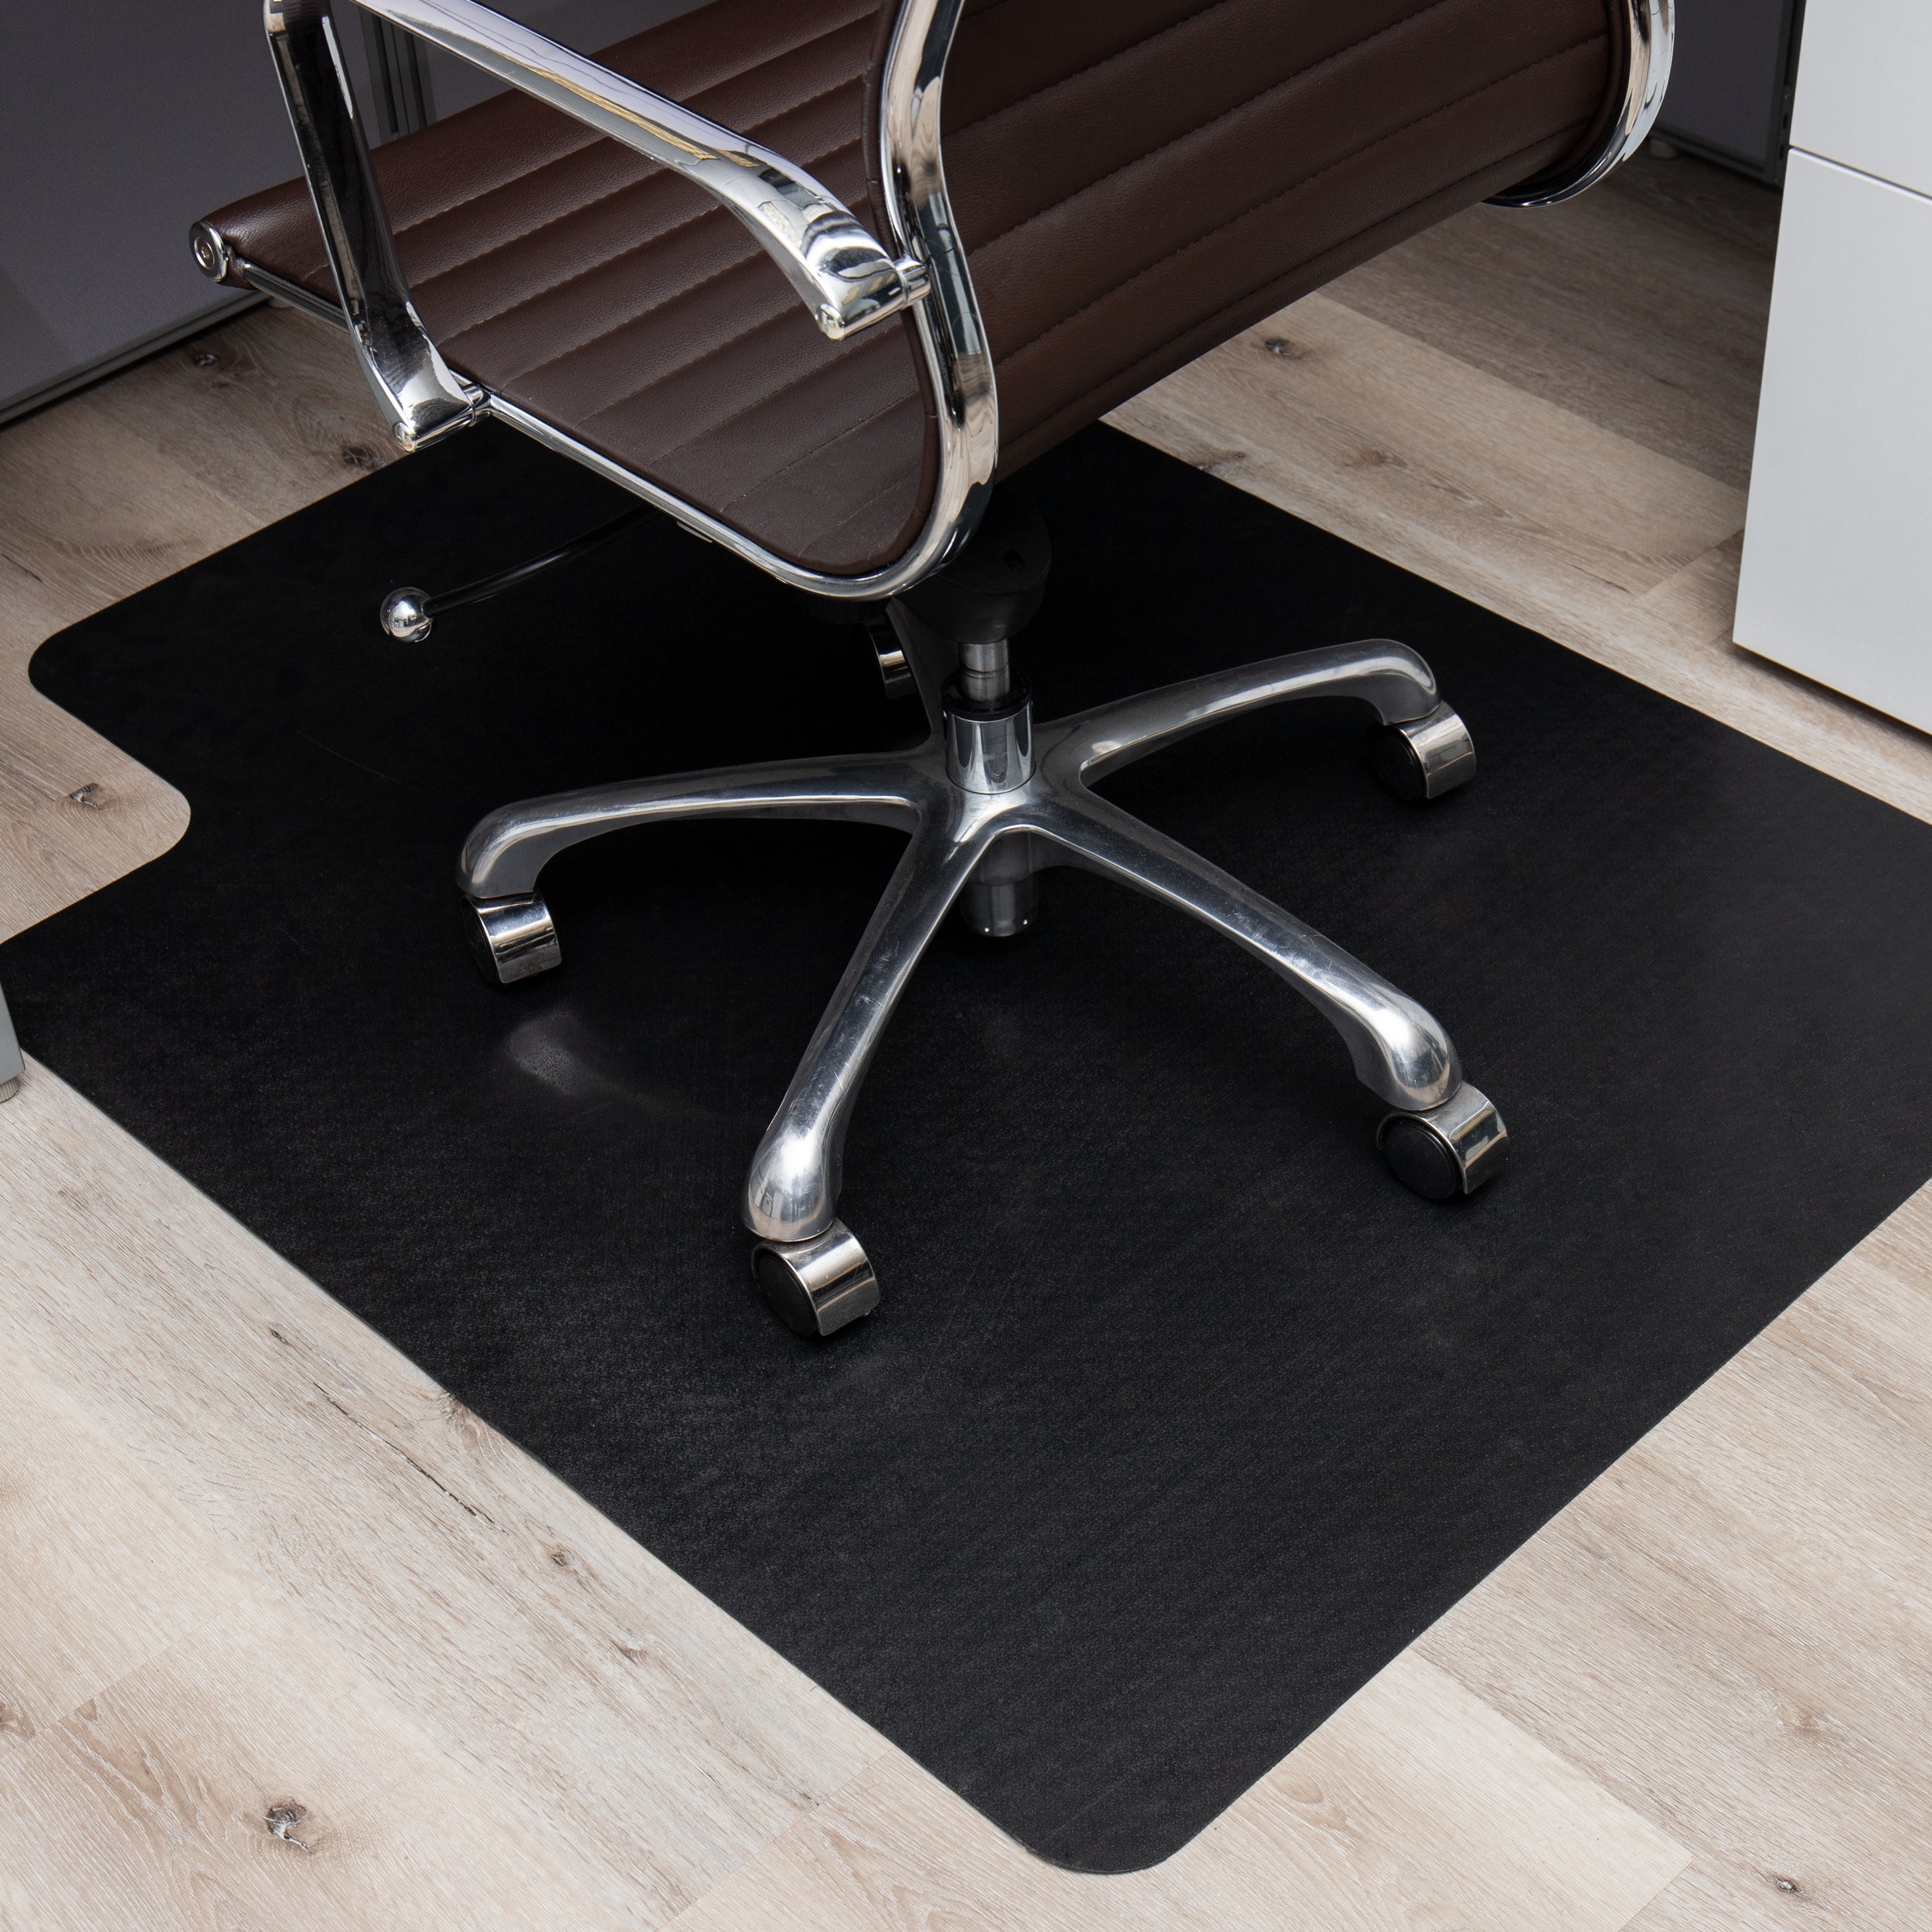 Protect Carpet Office Chair, Carpet Floor Mats Office Chairs